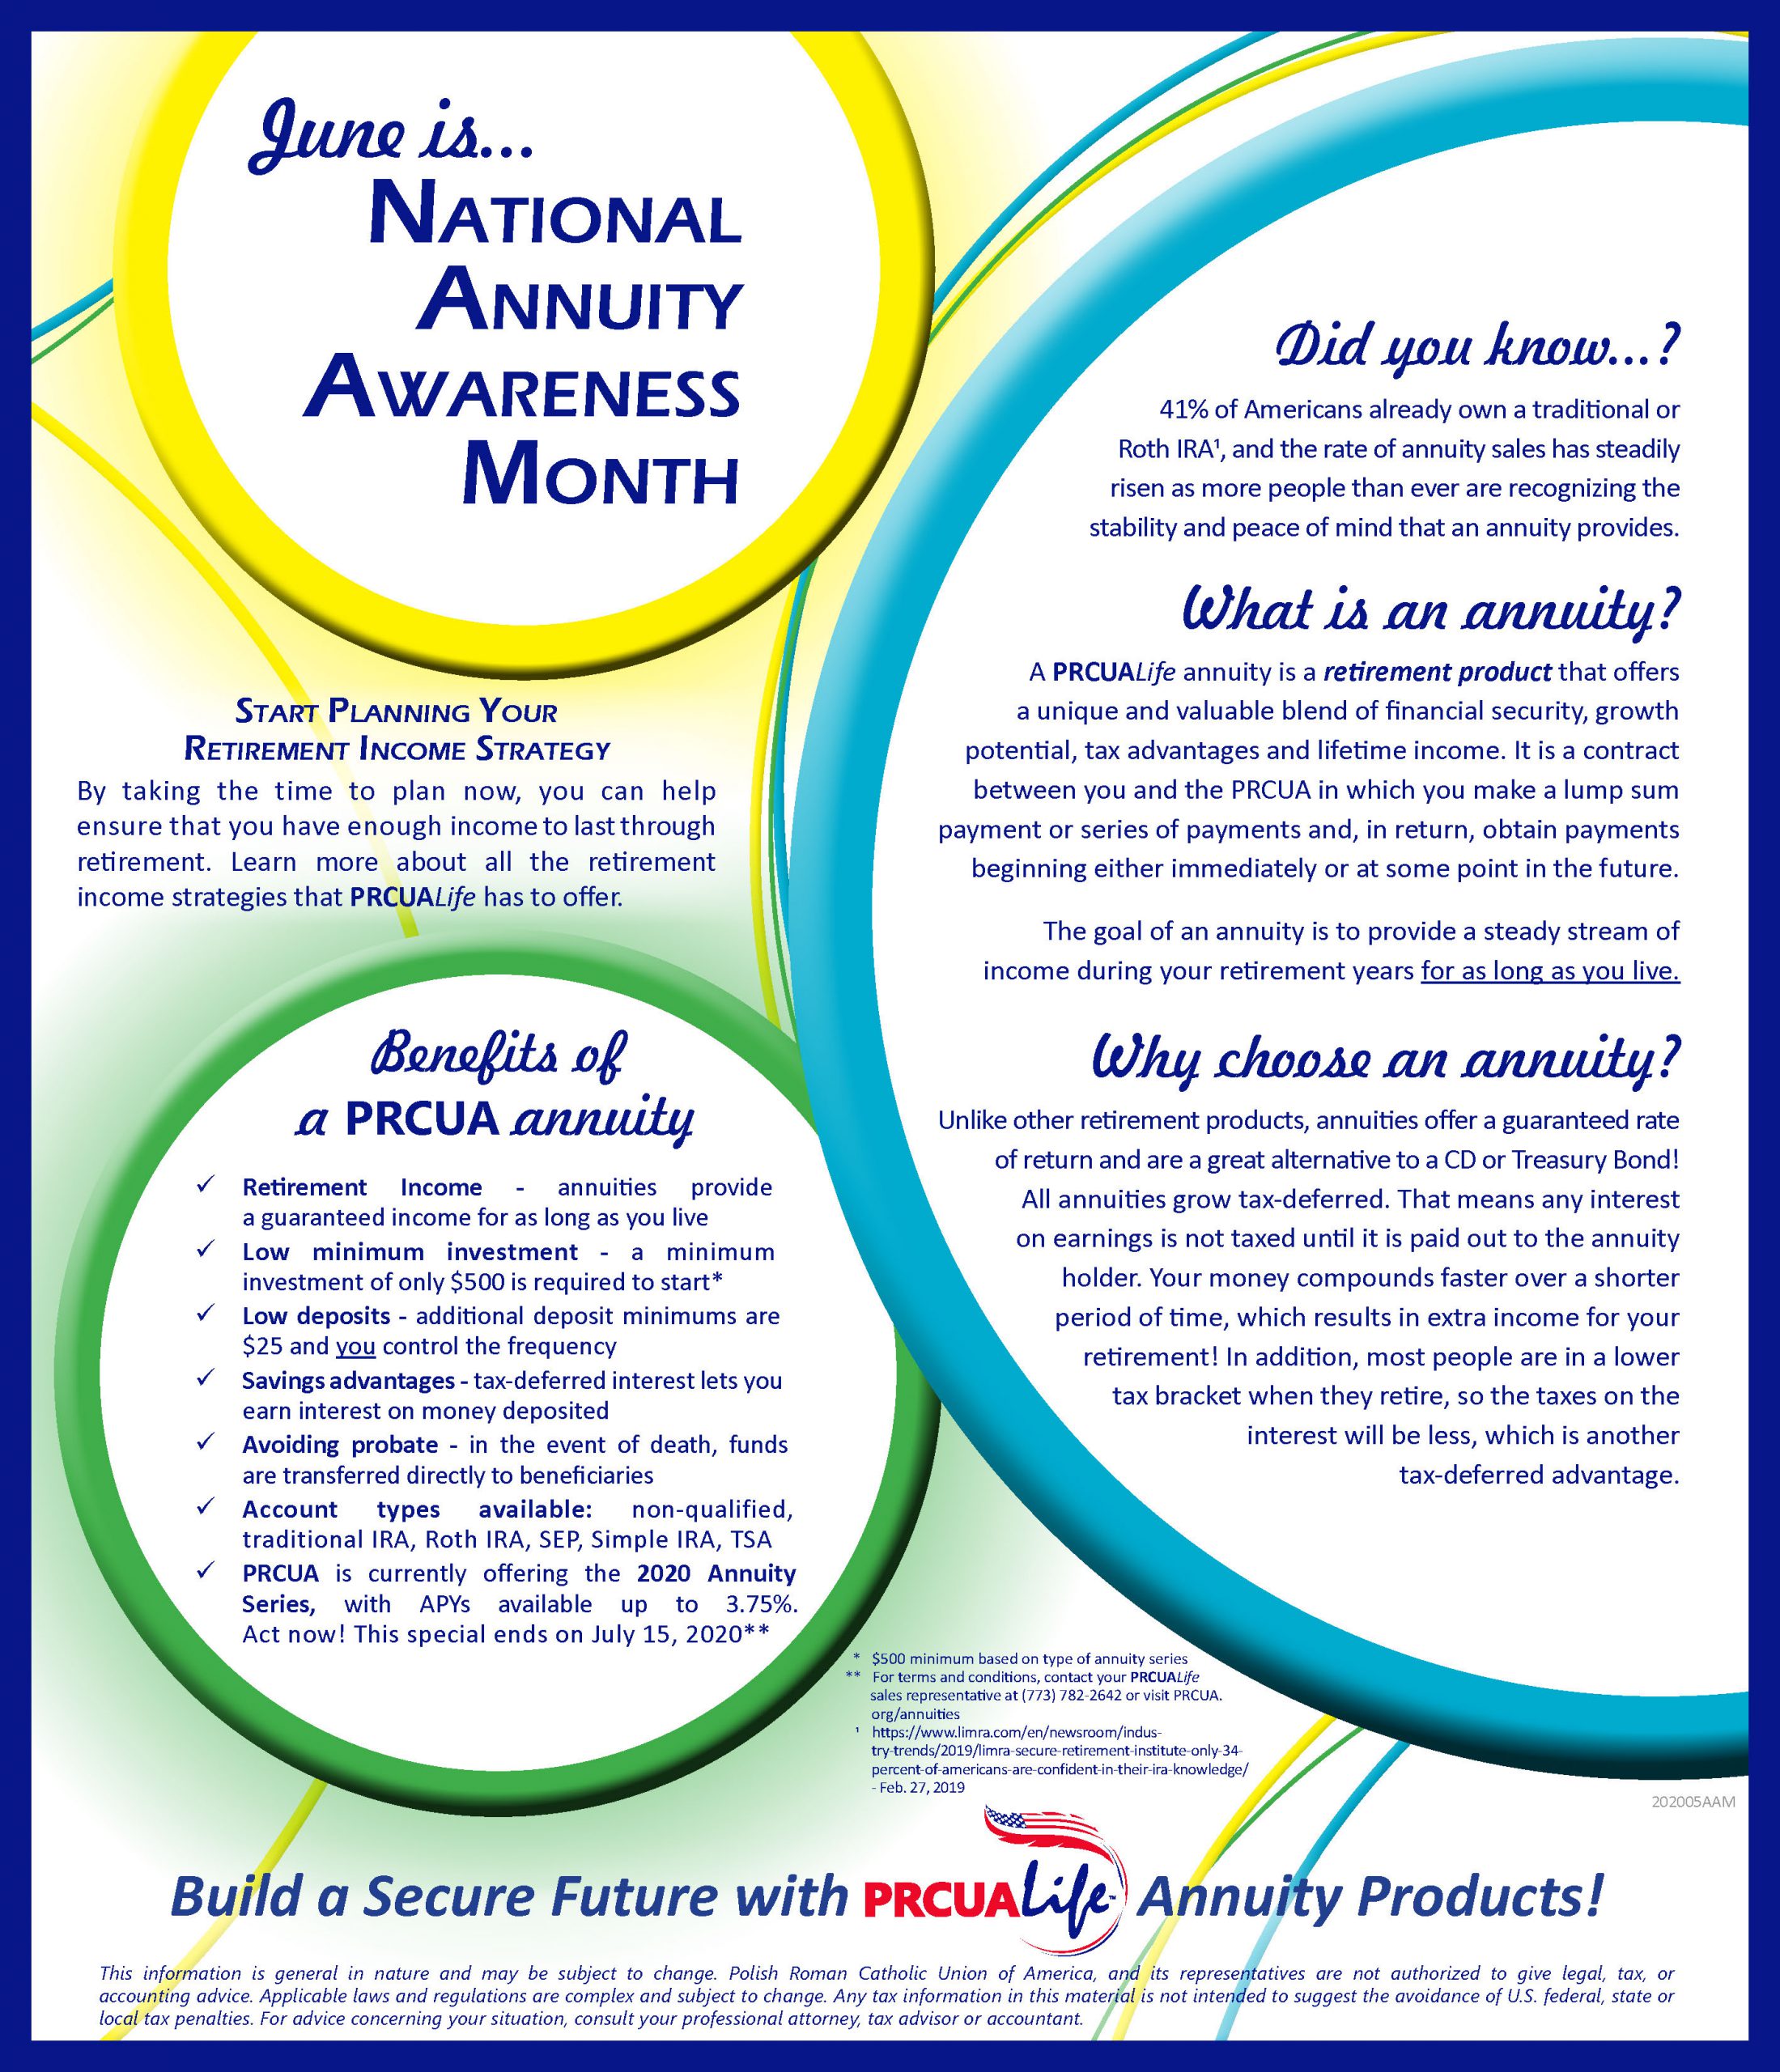 June is National Annuity Awareness Month